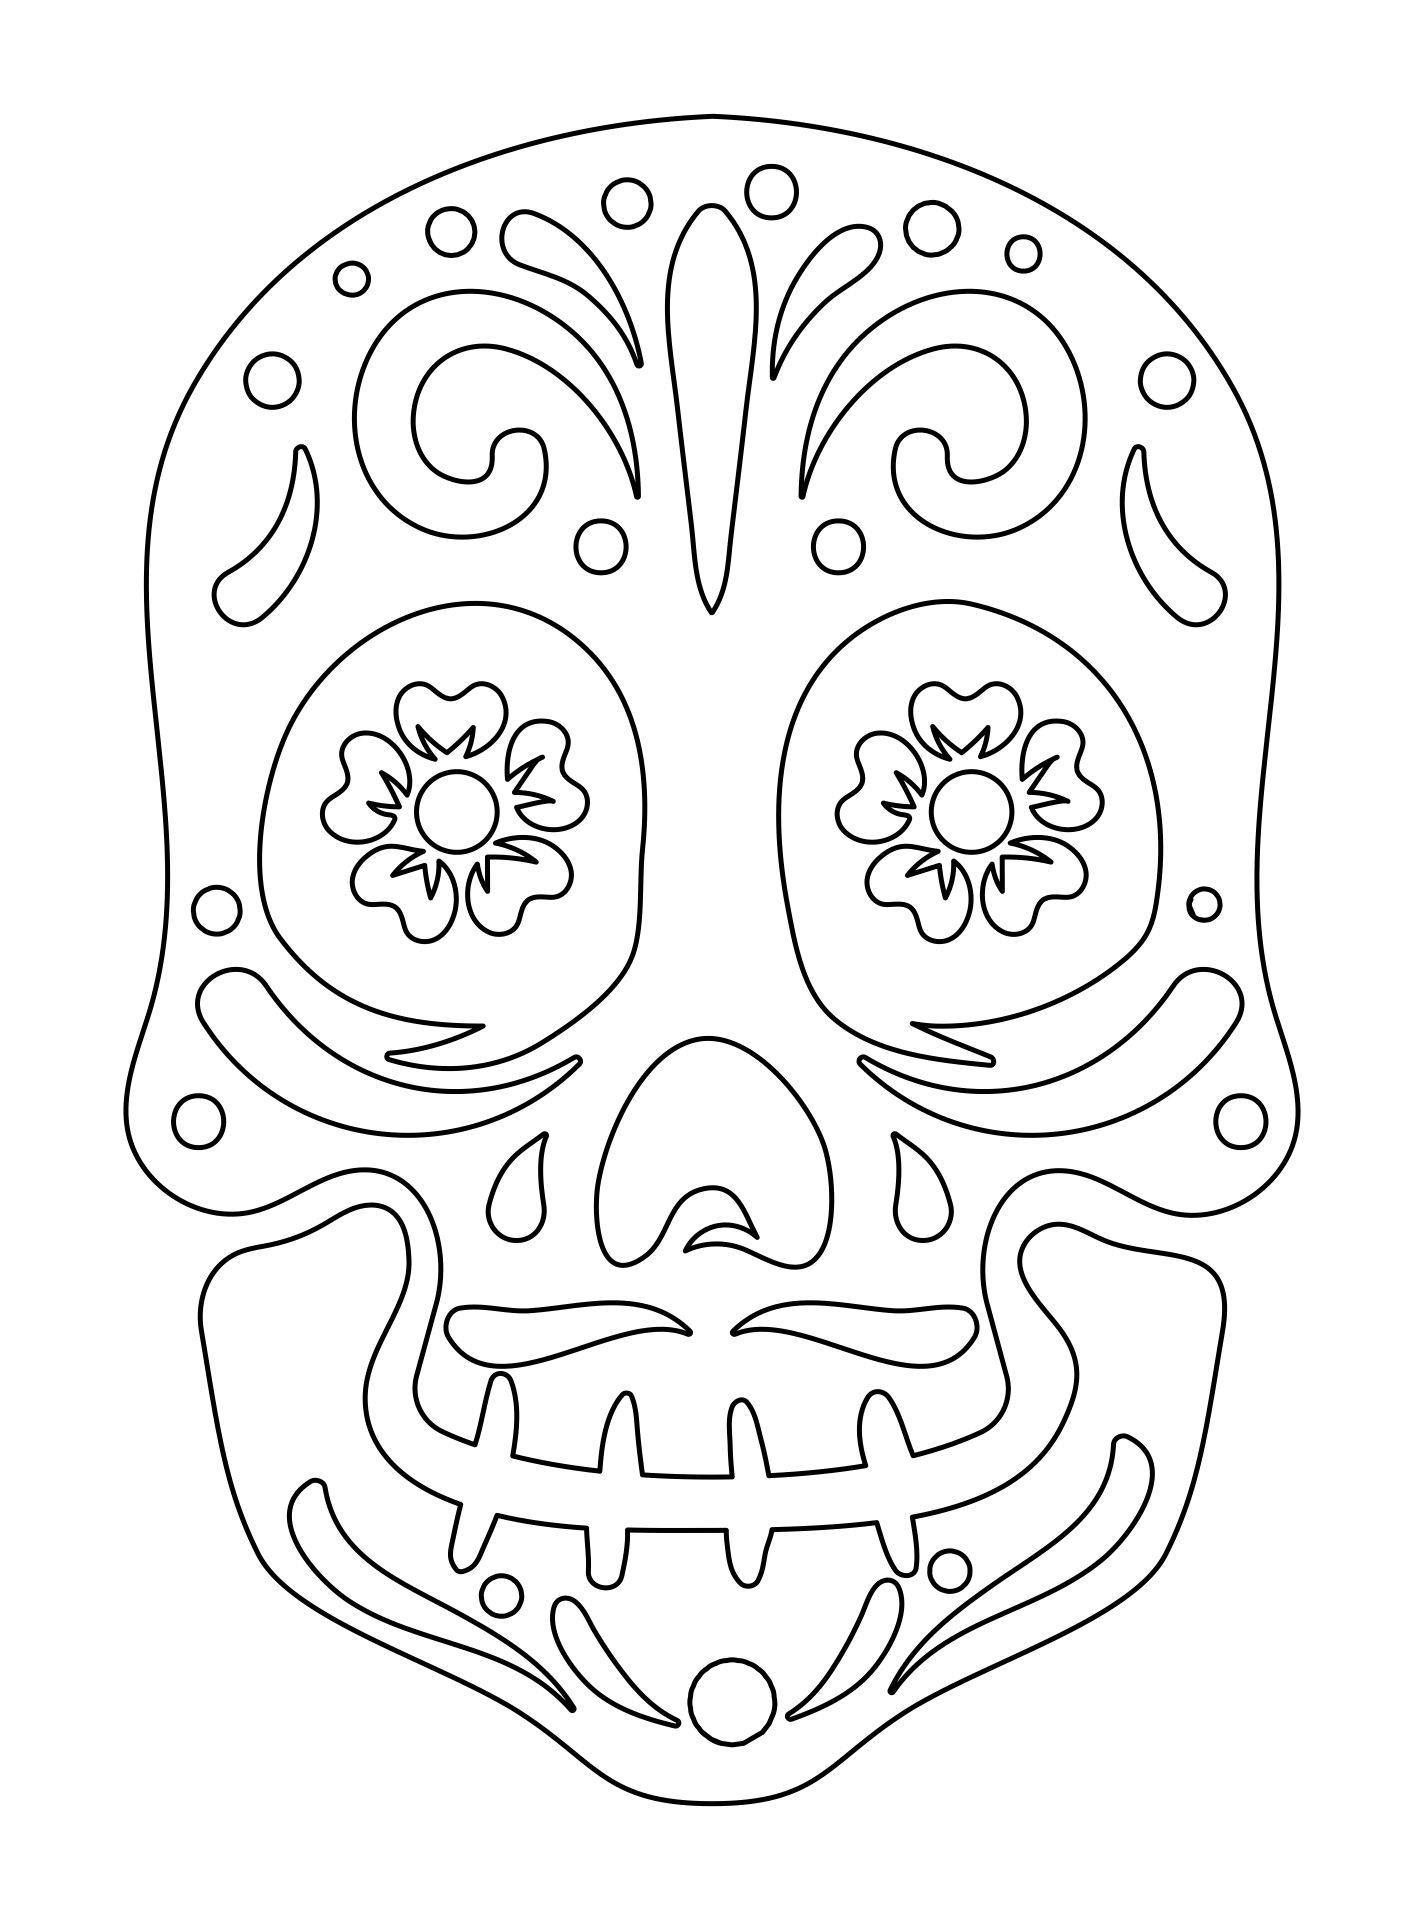 Skull Template Outline Halloween Coloring Page Printable